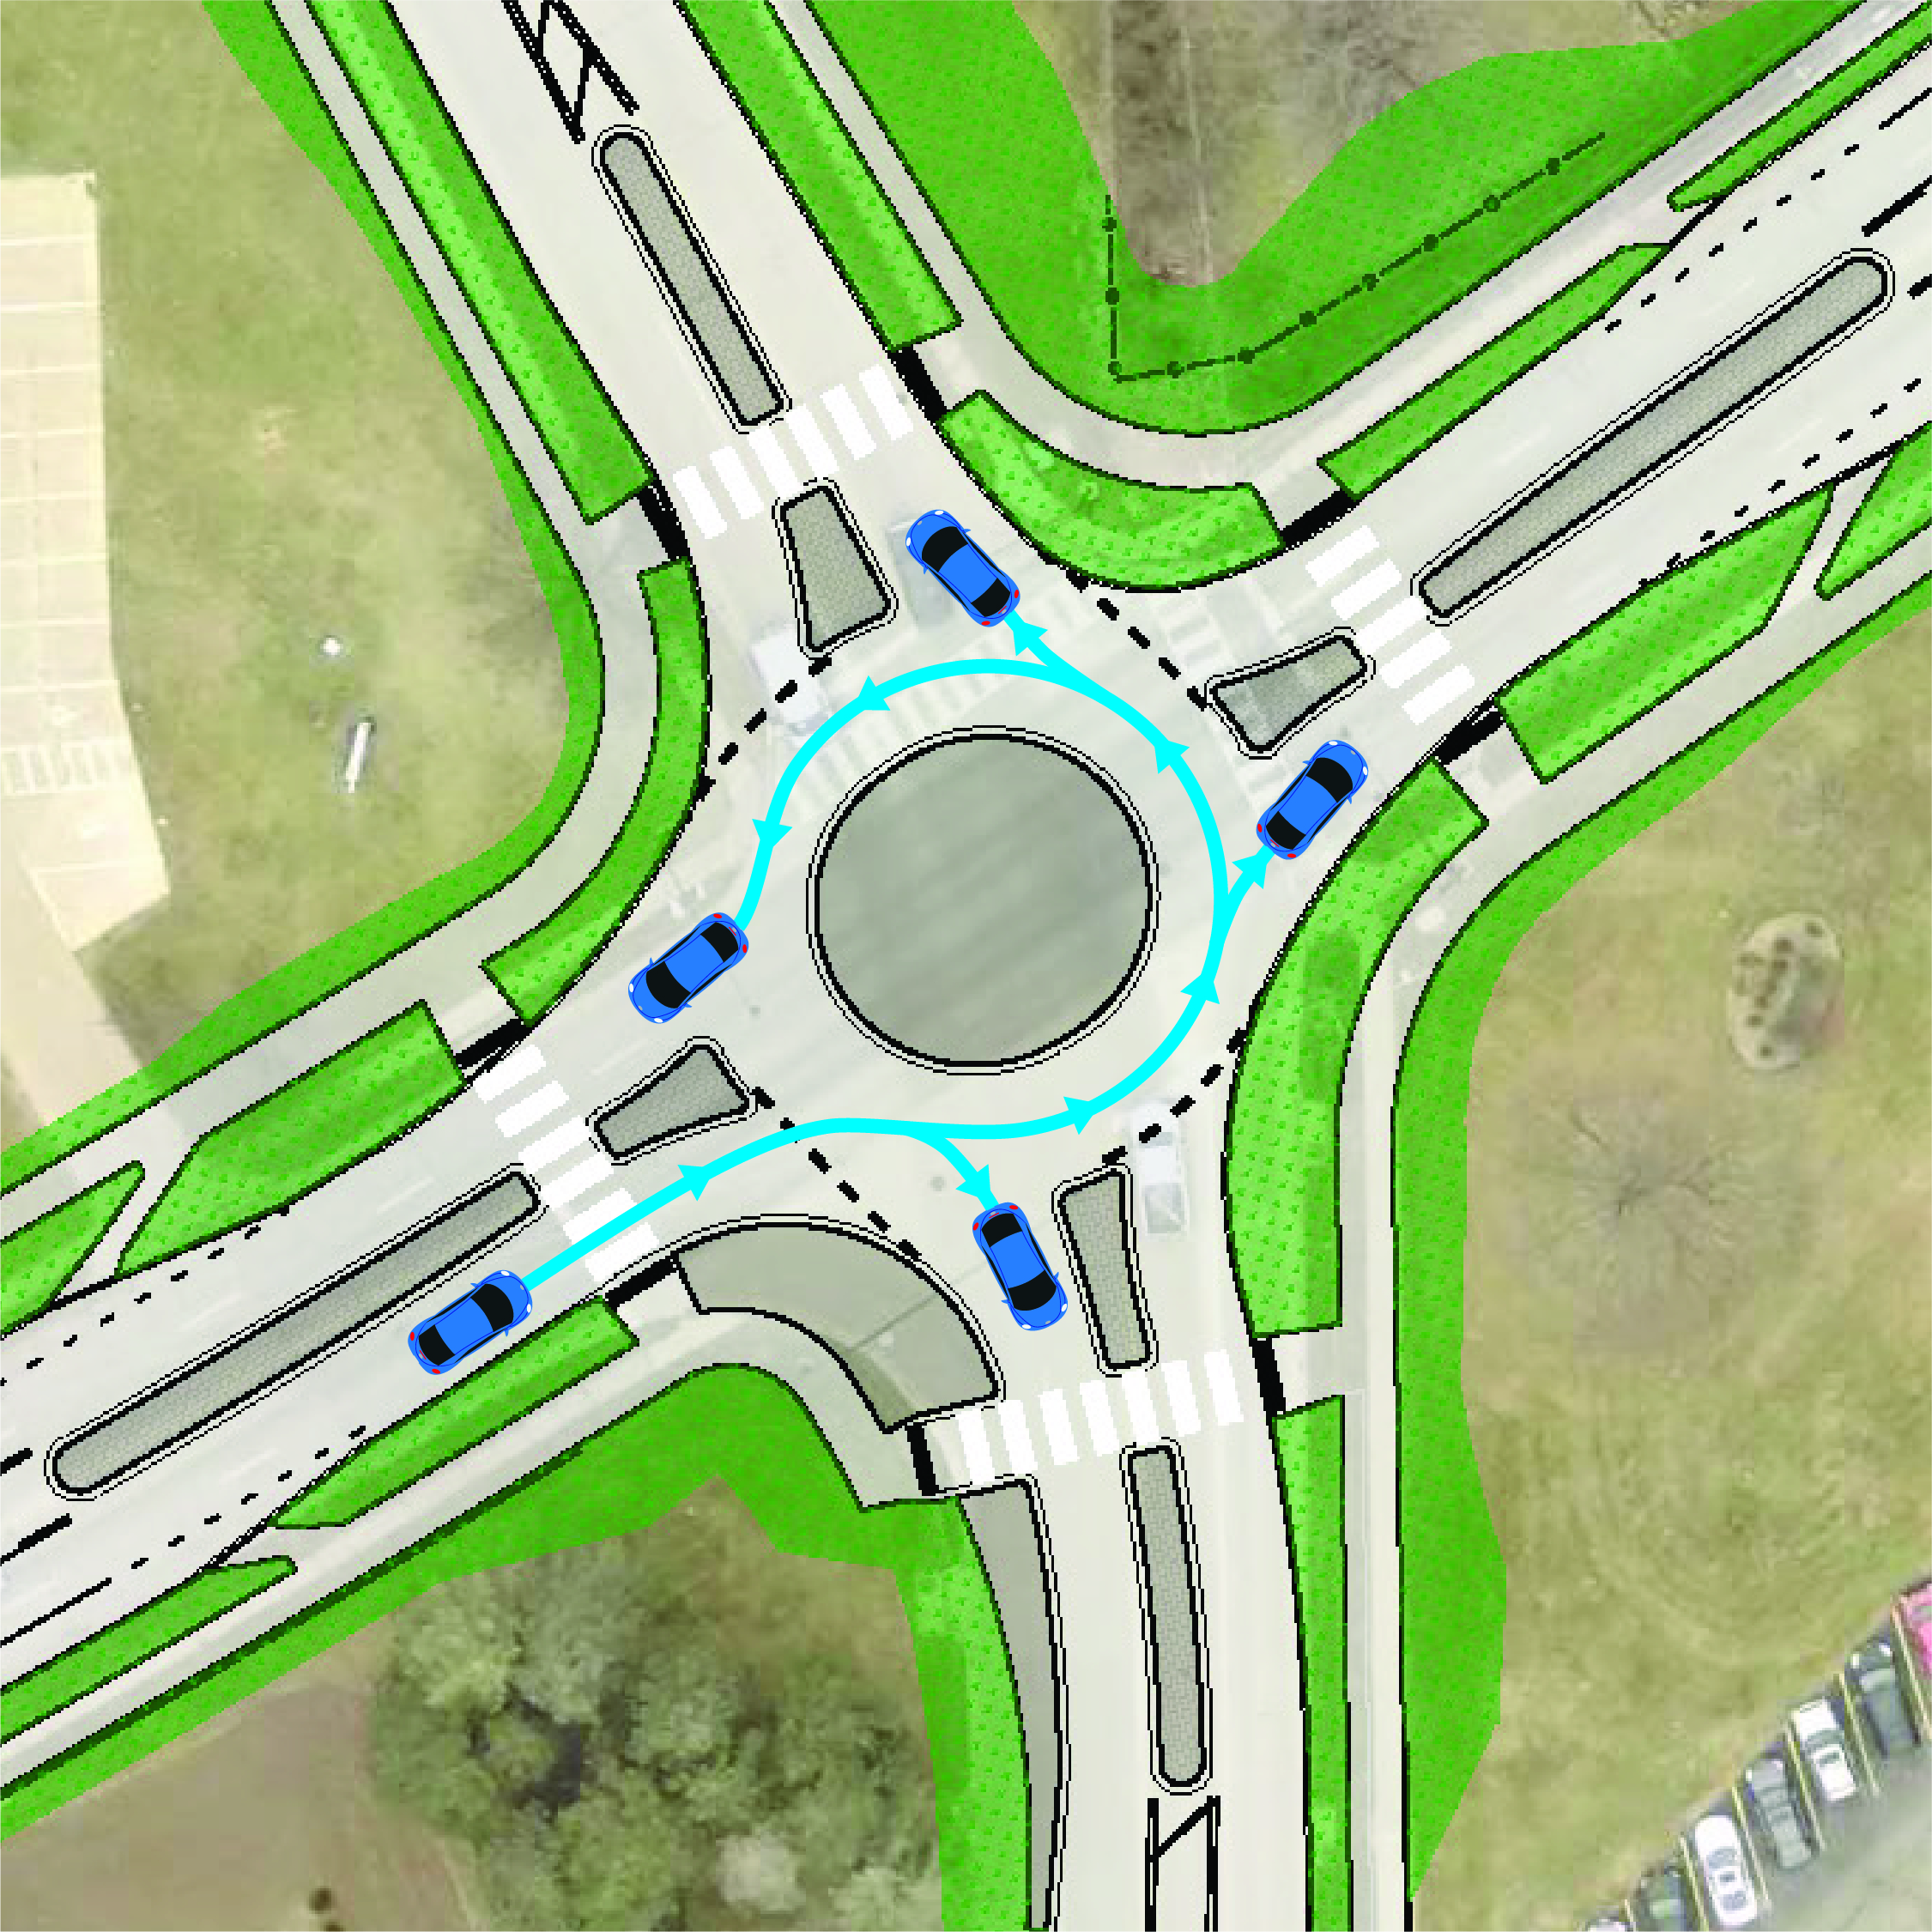 Rendering depicting cars traveling counterclockwise through a roundabout